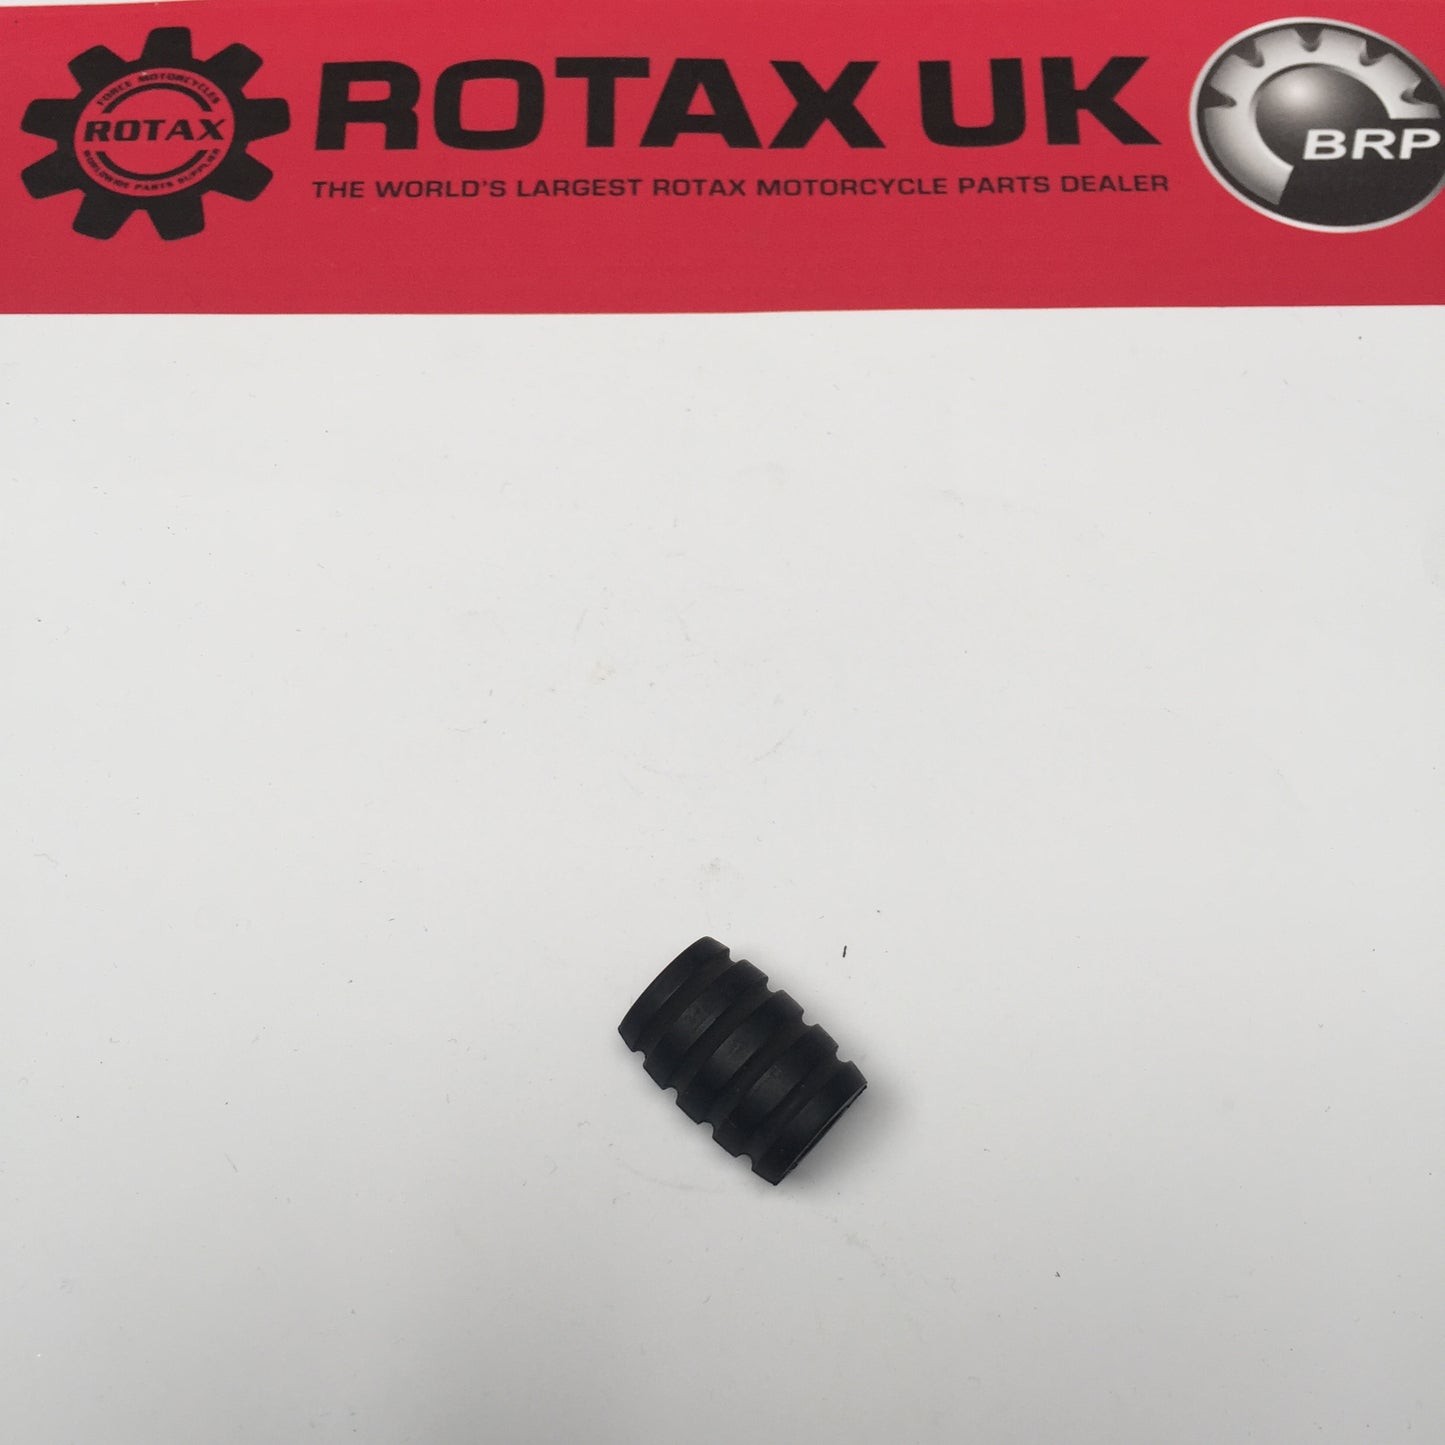 260545 - Gear Change Pedal Rubber for engine types: 127, 194, 244, 280, 281, 348, 406, 504, 560, 605.